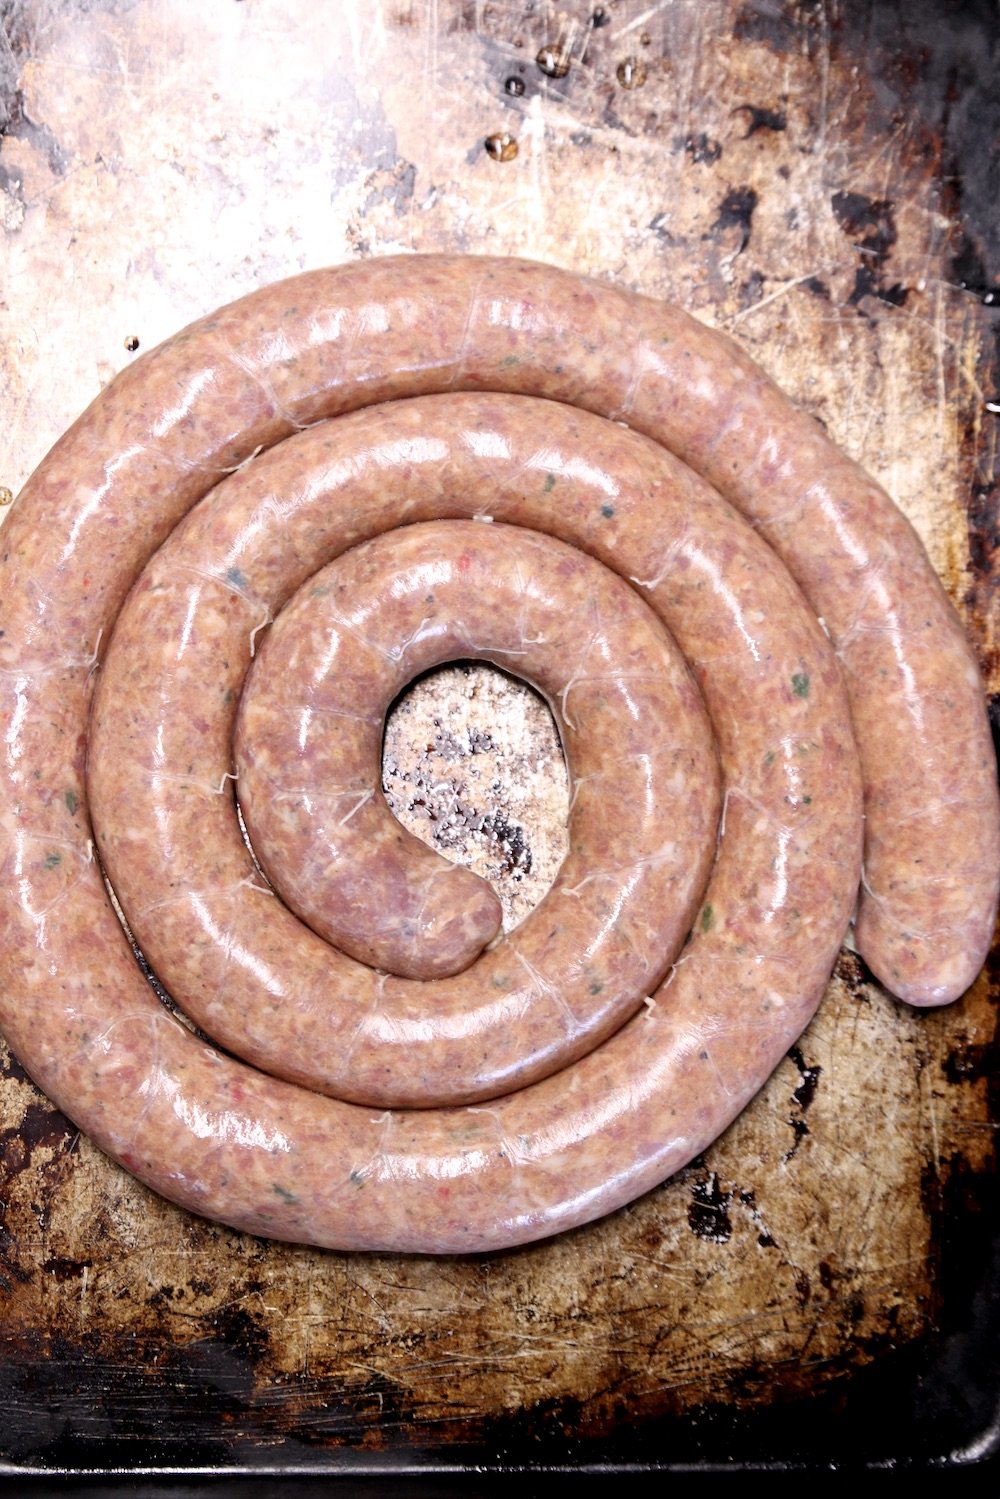 coil of pork sausage in a casing